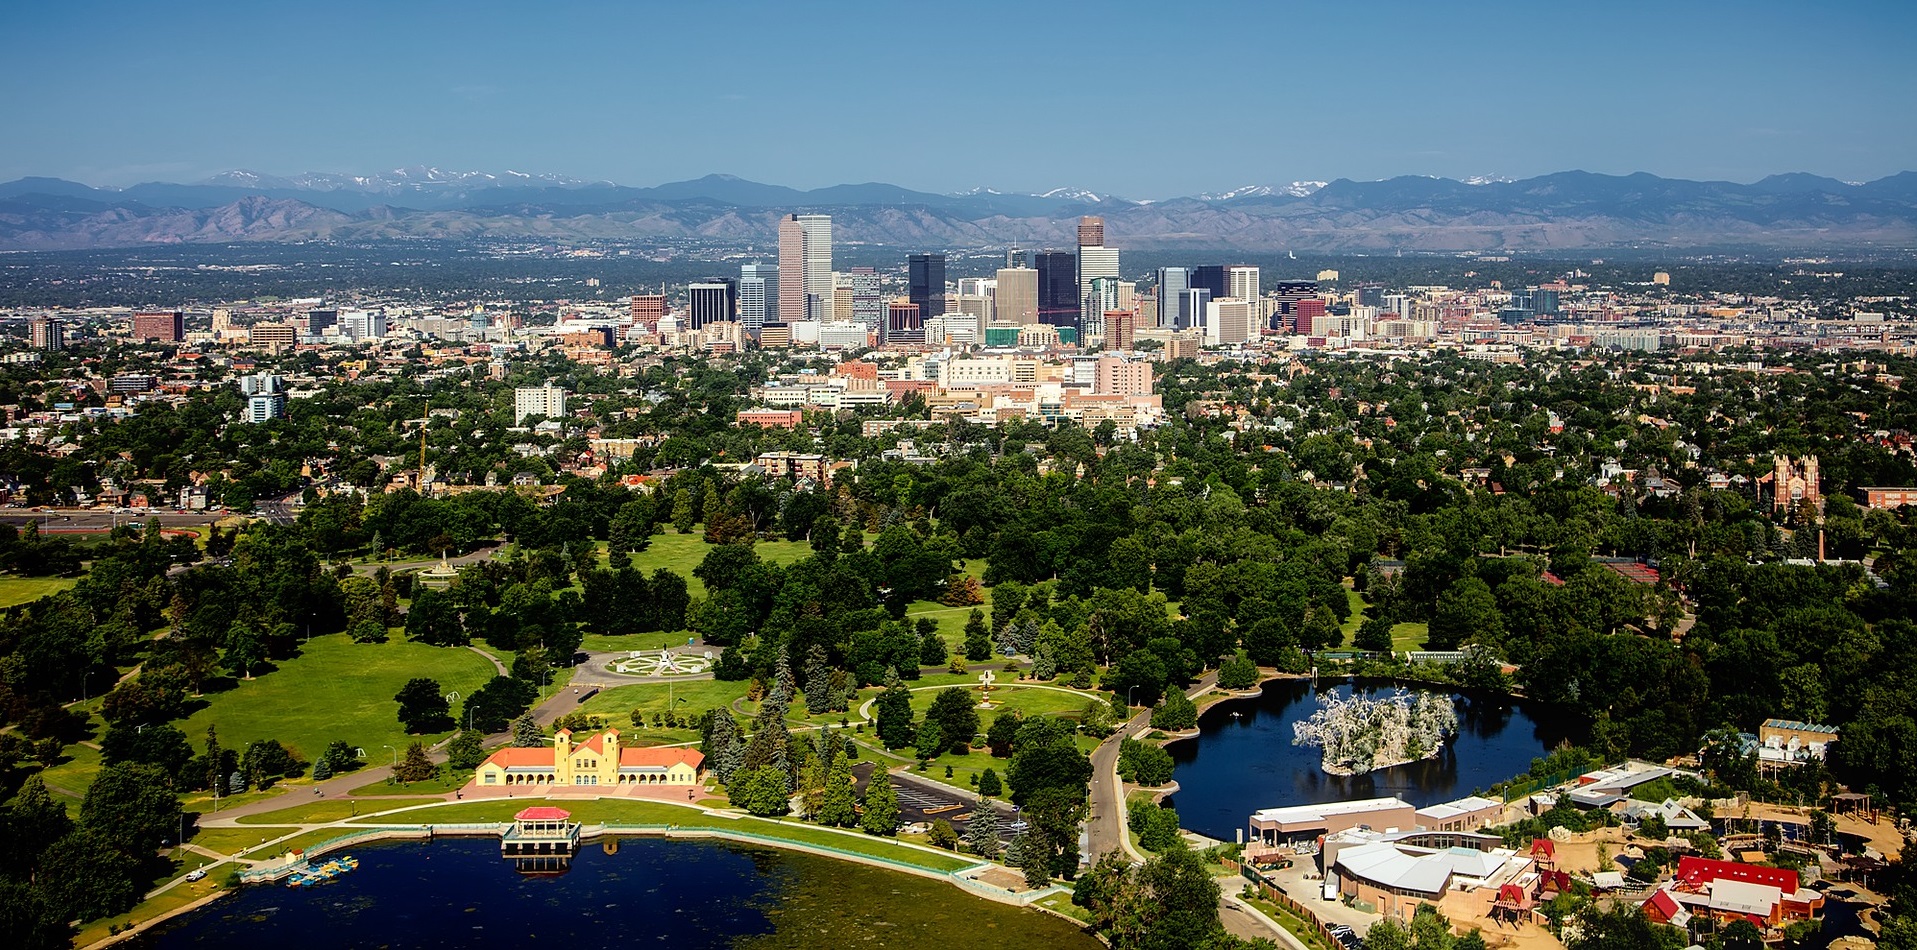 Denver Mustsee Attractions Offer a Mix of Culture and Entertainment